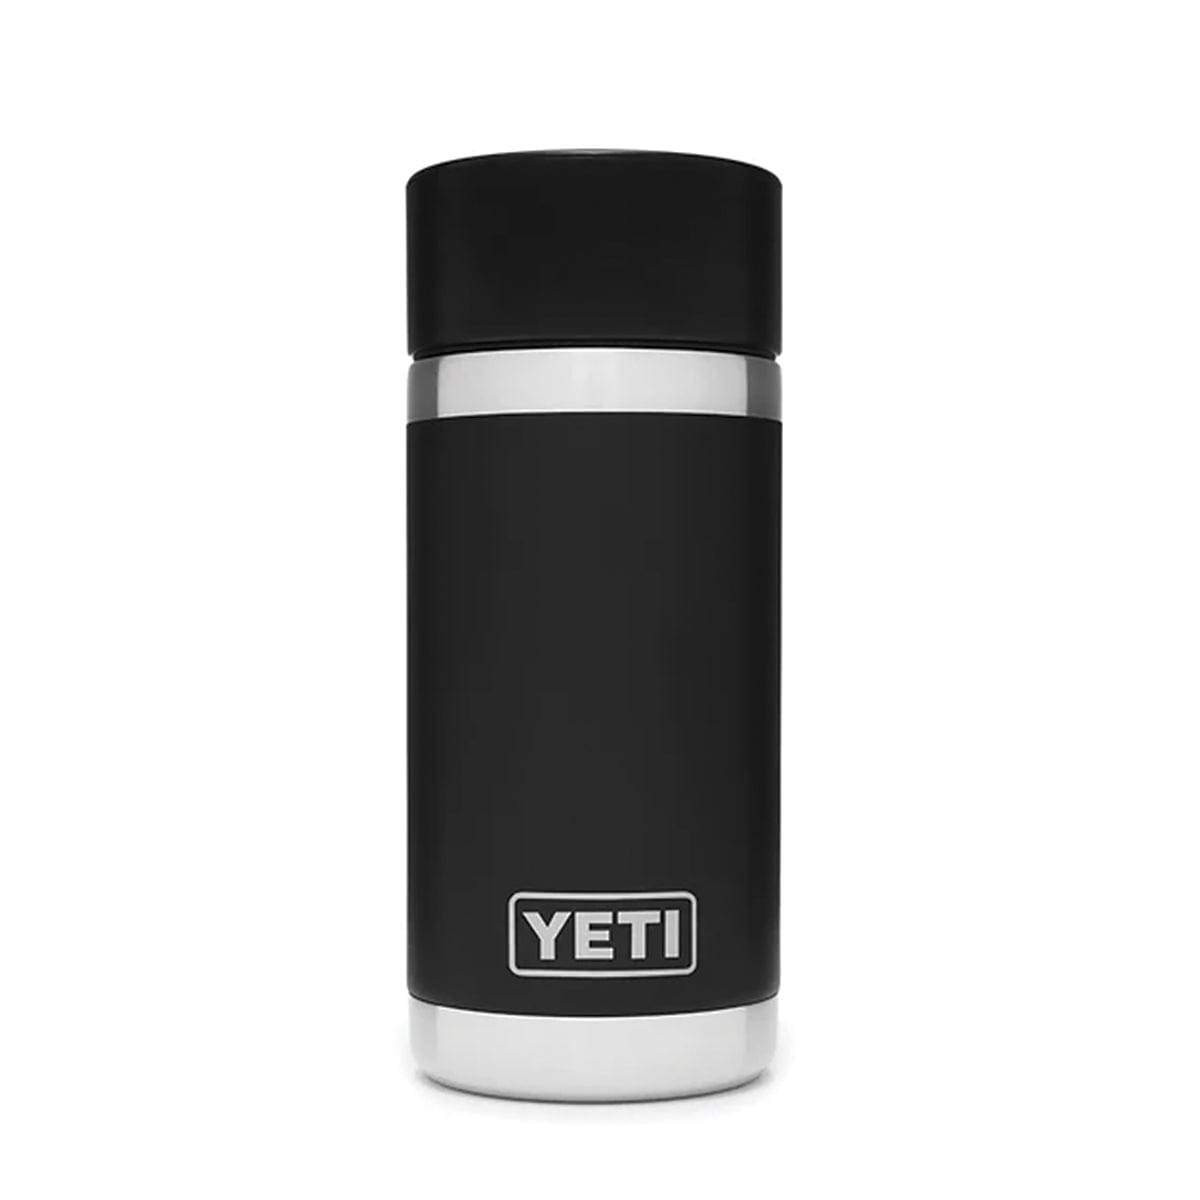 Best Stainless Small Coffee Mug for Travelers - Review Yeti 12oz bottle  with Hot Shot Cap 